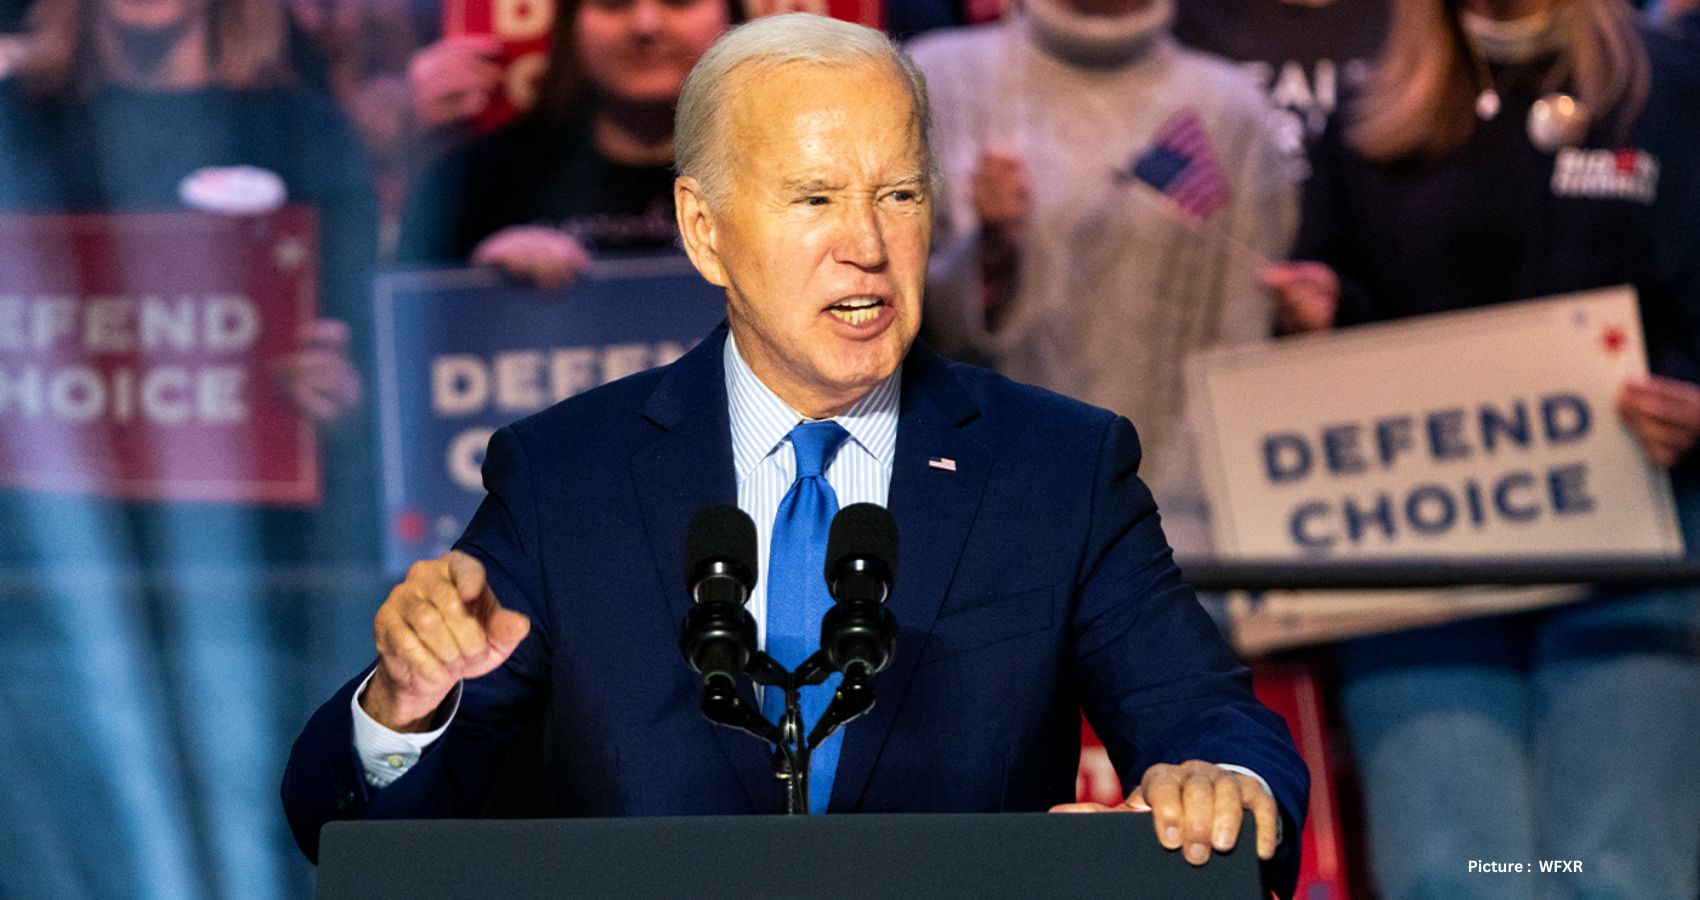 Featured & Cover Democrats Strategize Amidst Political Turmoil Biden's Allies React to Special Counsel's Report Fallout